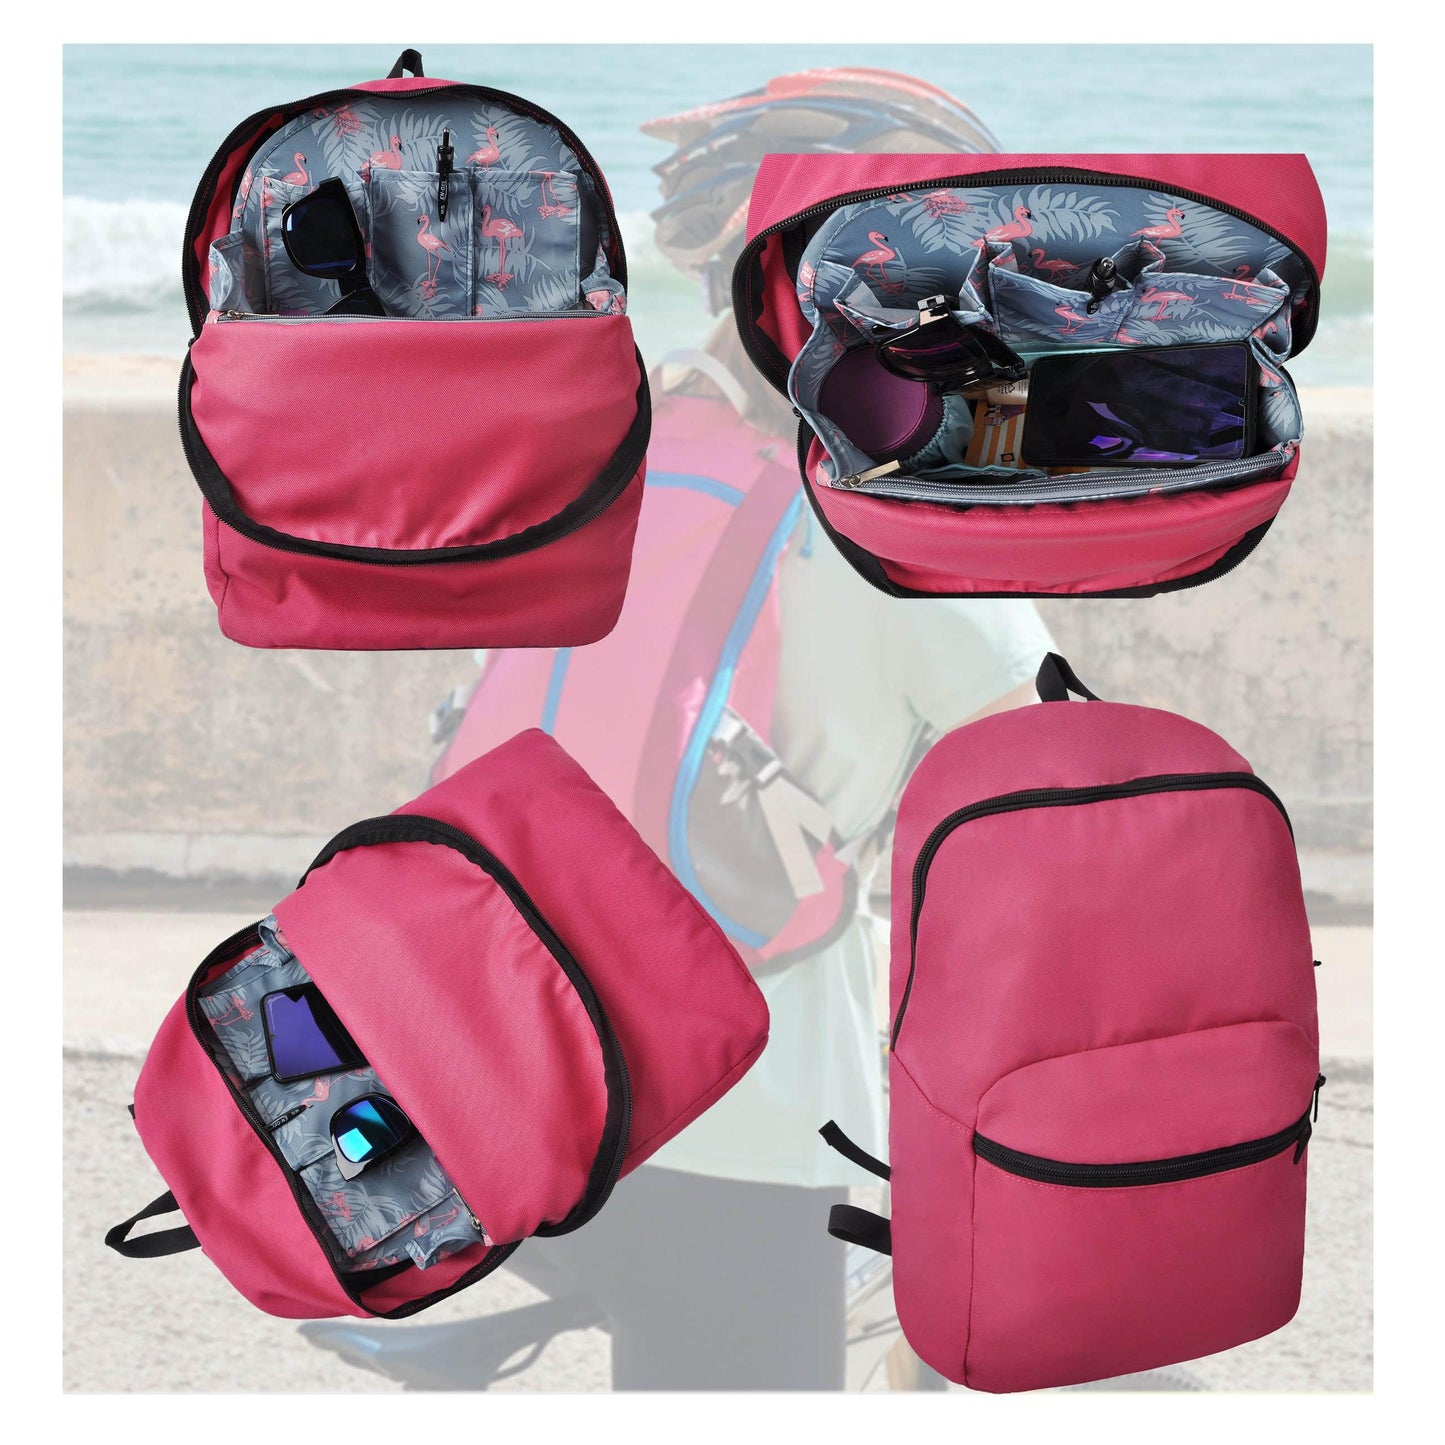 Backpack Organizer Insert Liner Hanging Travel Bag in Bag with Many Pockets